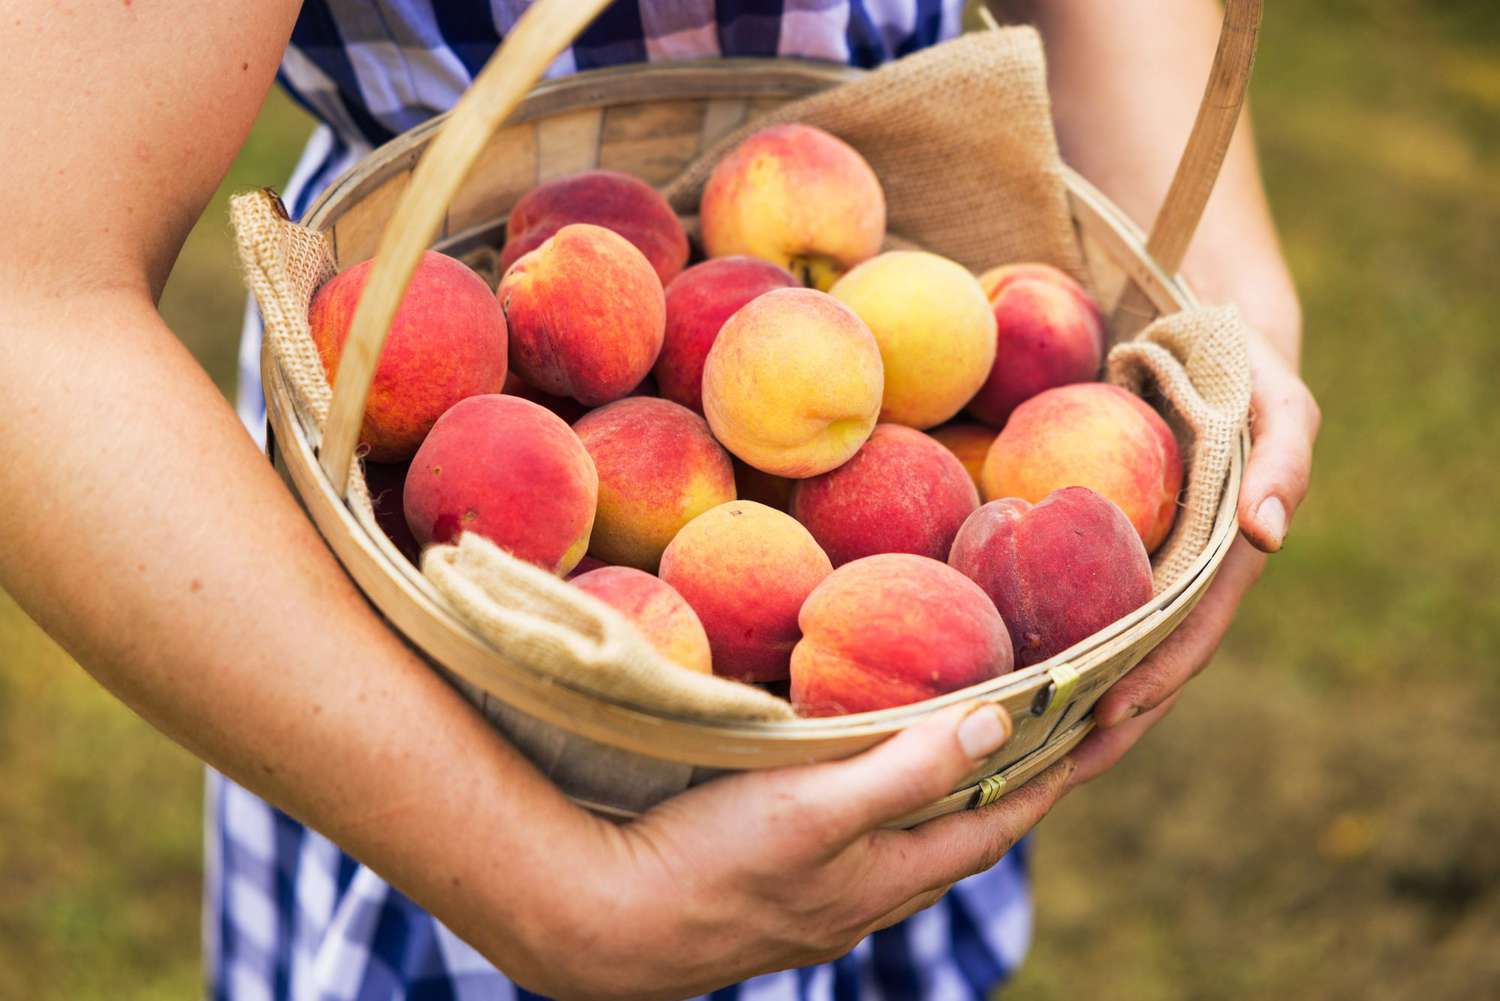 arms holding a basket of peaches